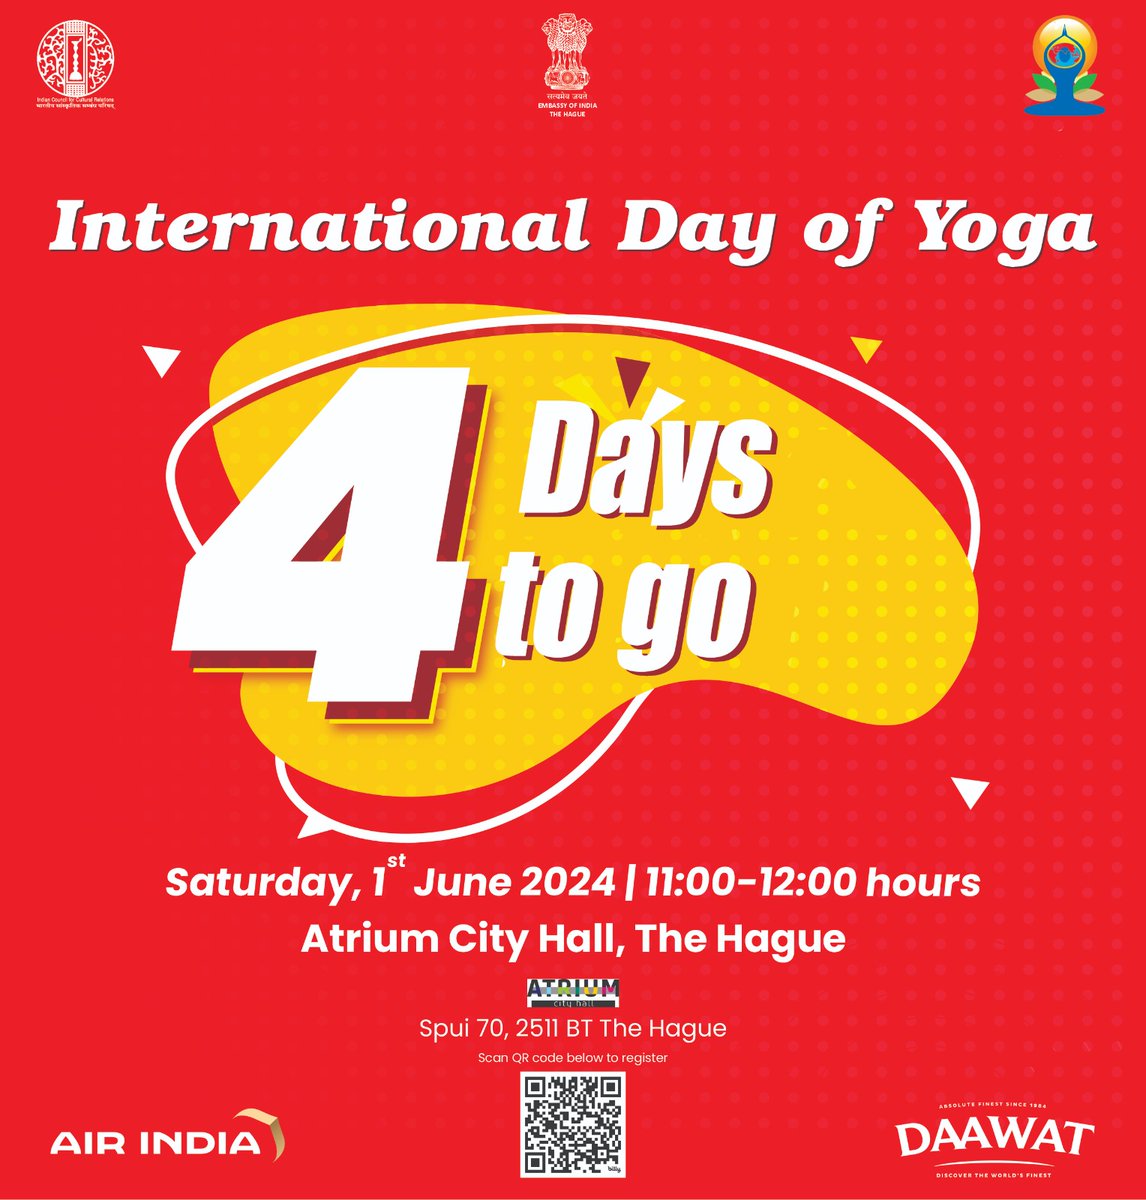 Join us for the 10th International Day of Yoga 2024 on Saturday, 1st June @AtriumCityHall in association with
@GemeenteDenHaag
We encourage to carry your own yoga mat. 
Register @ bit.ly/4b7fWIY or scan QR code👇 
#countdown #IDY2024 #InternationalDayOfYoga2024